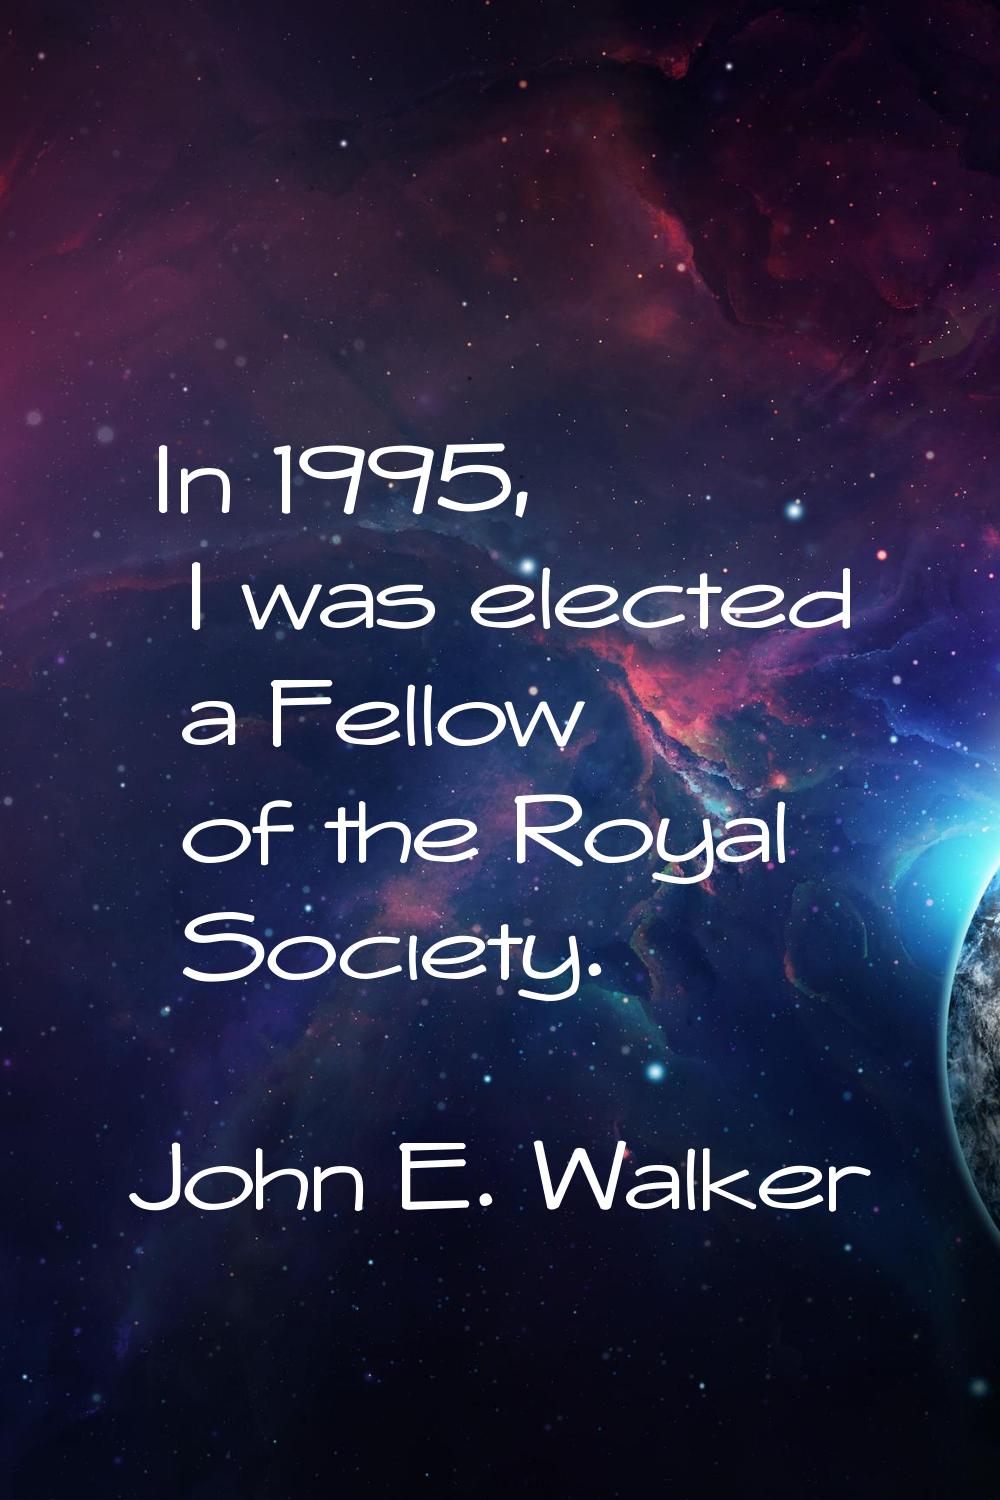 In 1995, I was elected a Fellow of the Royal Society.